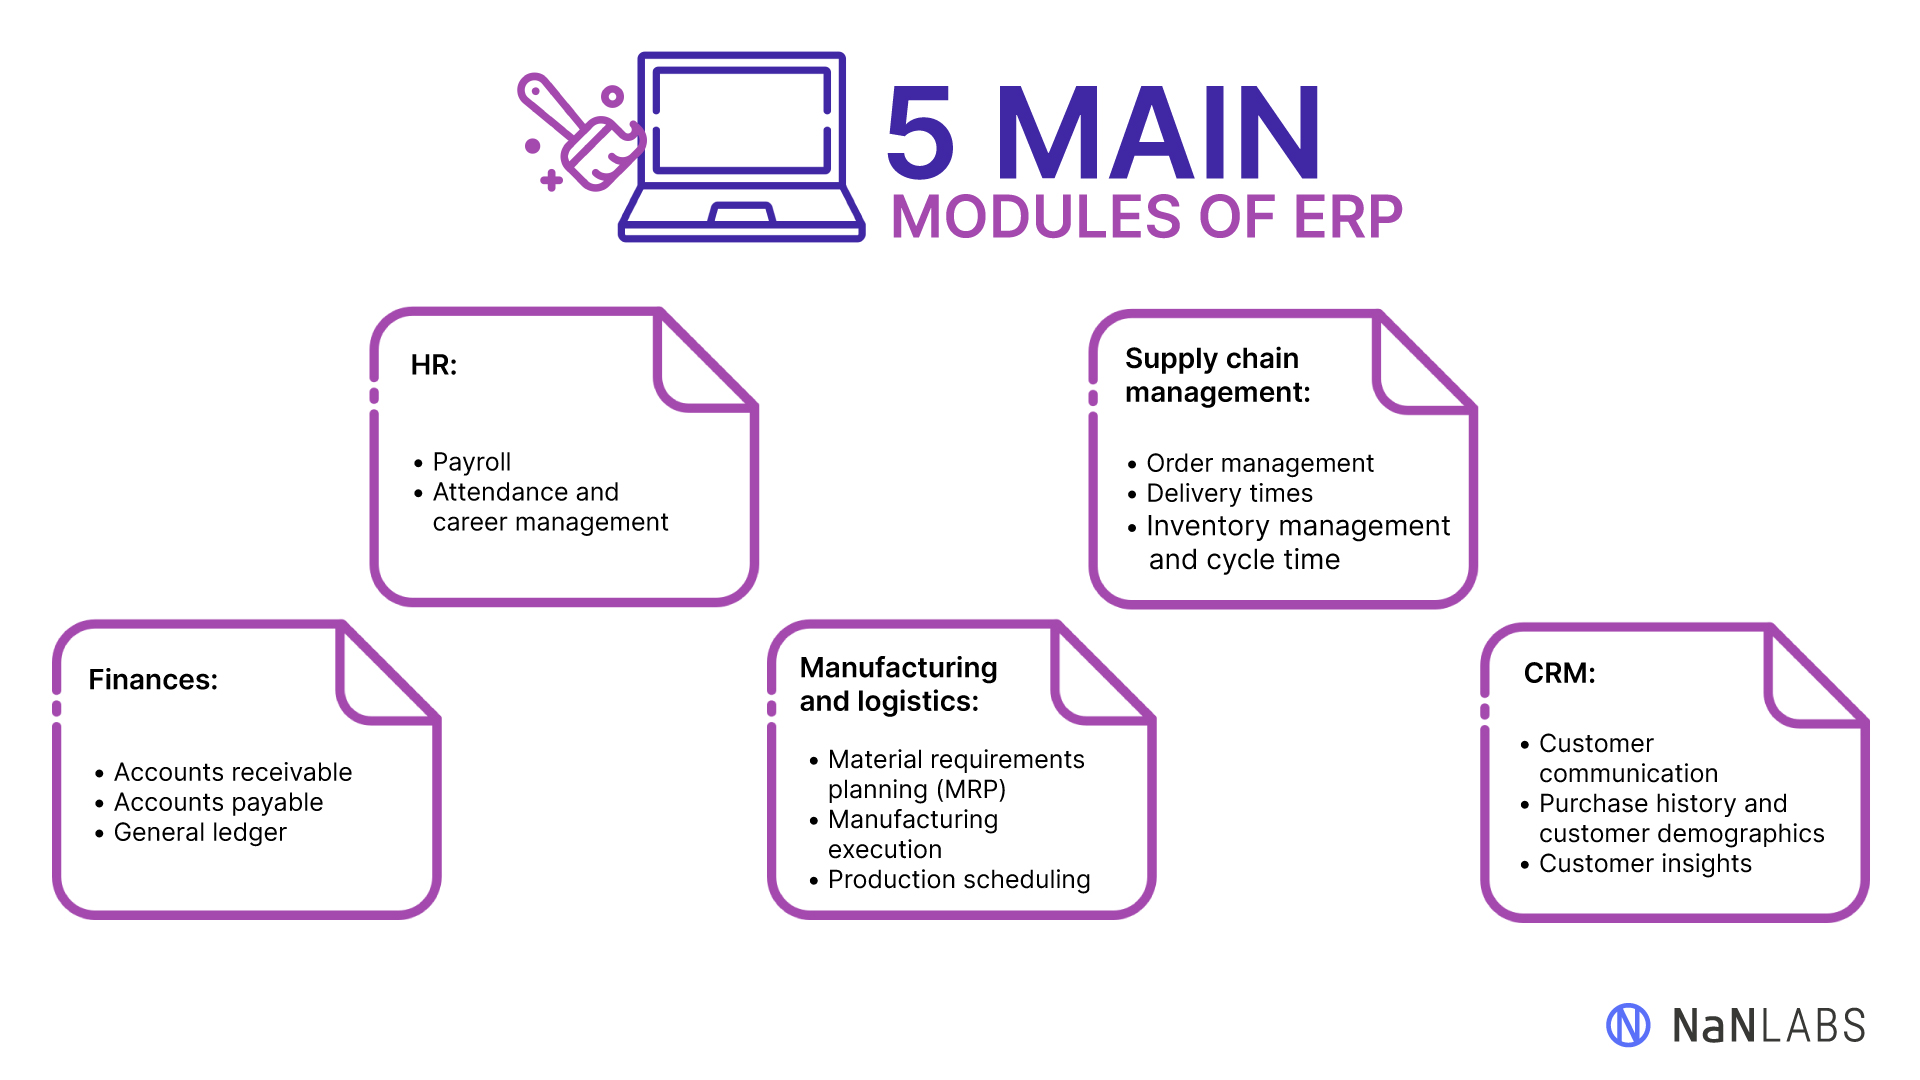 Diagram of 5 ERP modules: finances, human resources, manufacturing and logistics, supply chain management, and customer relationship management.